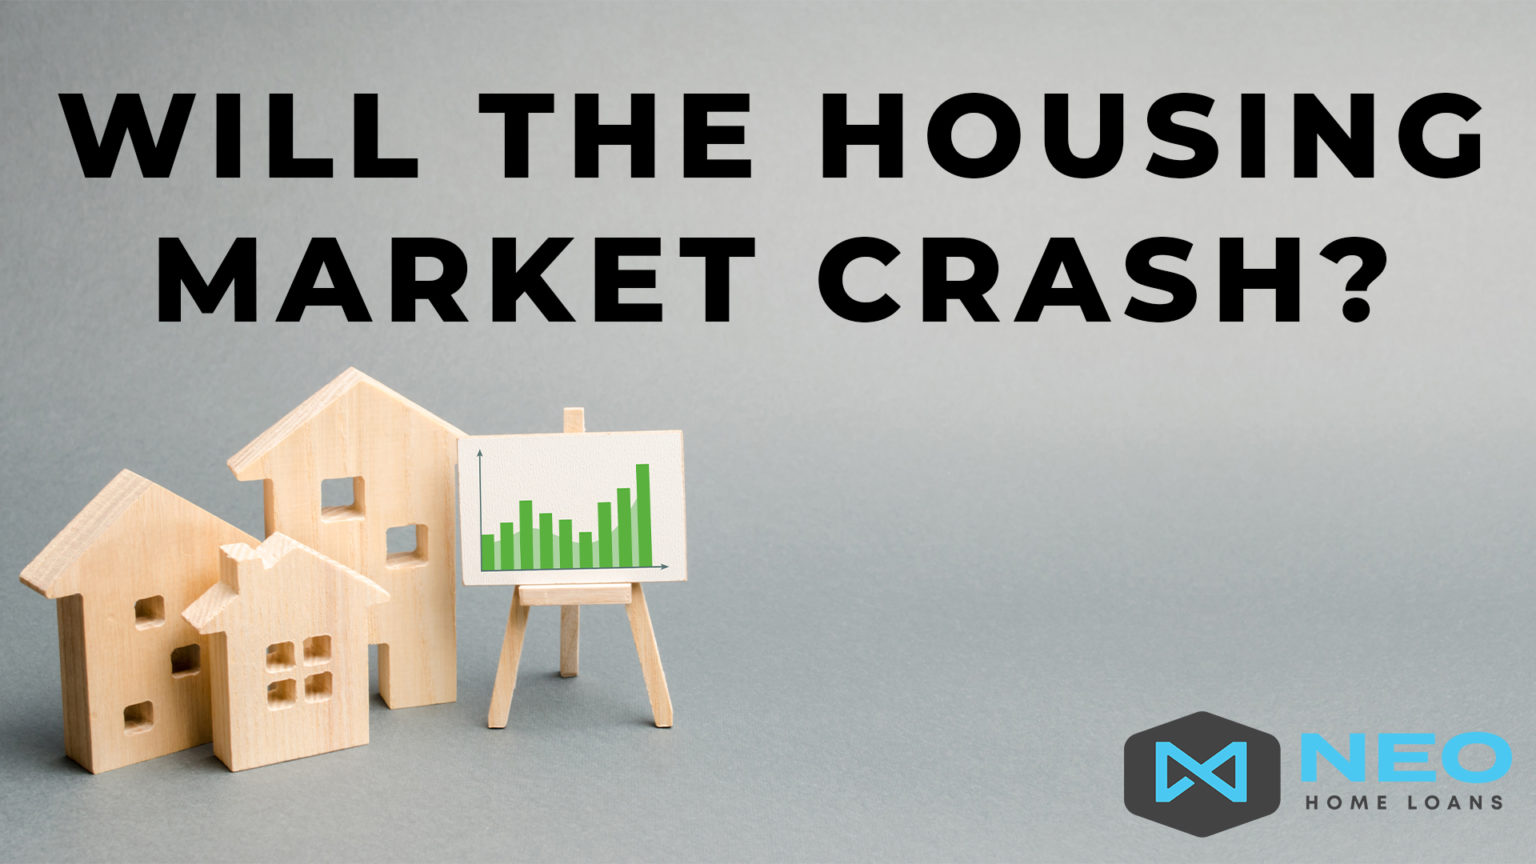 Will the Housing Market Crash? NEO Home Loans